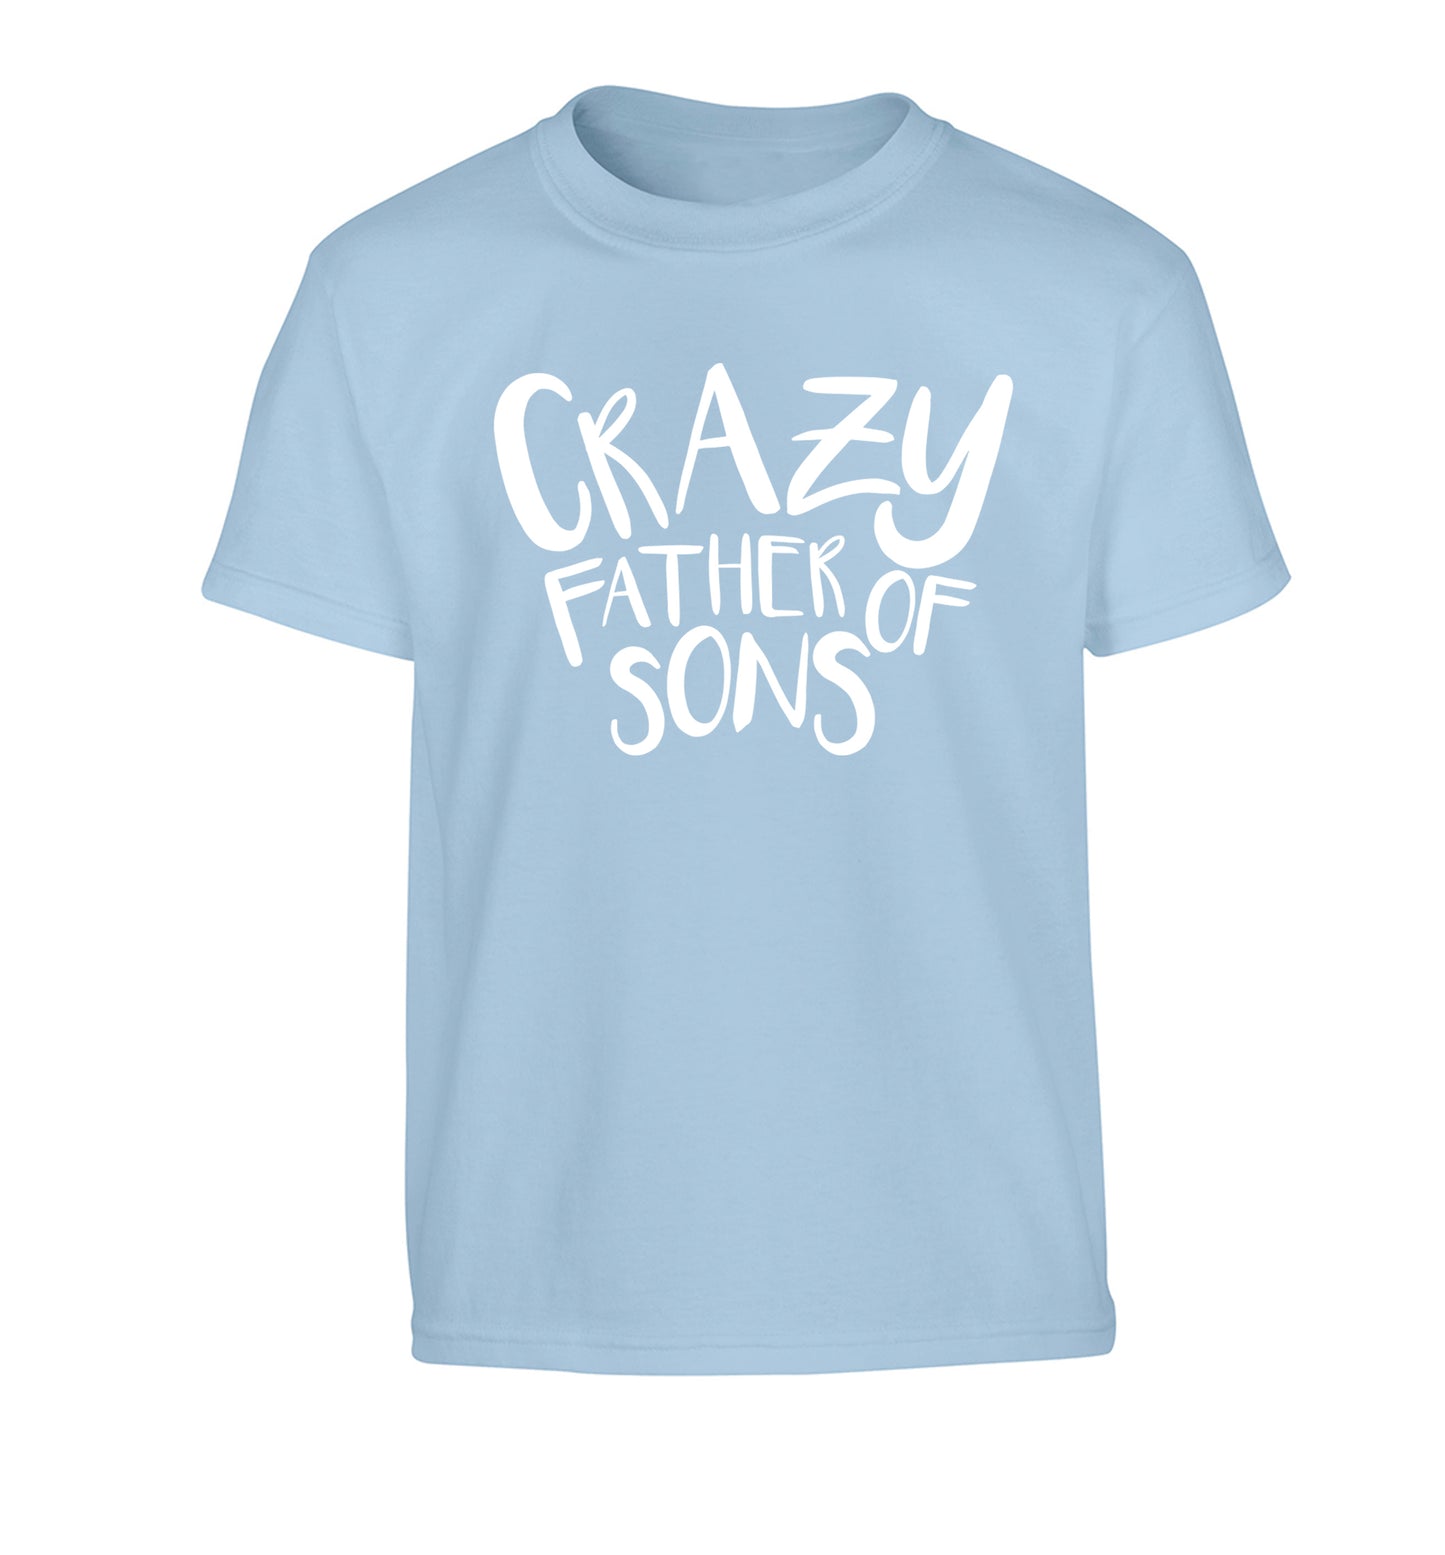 Crazy father of sons Children's light blue Tshirt 12-13 Years